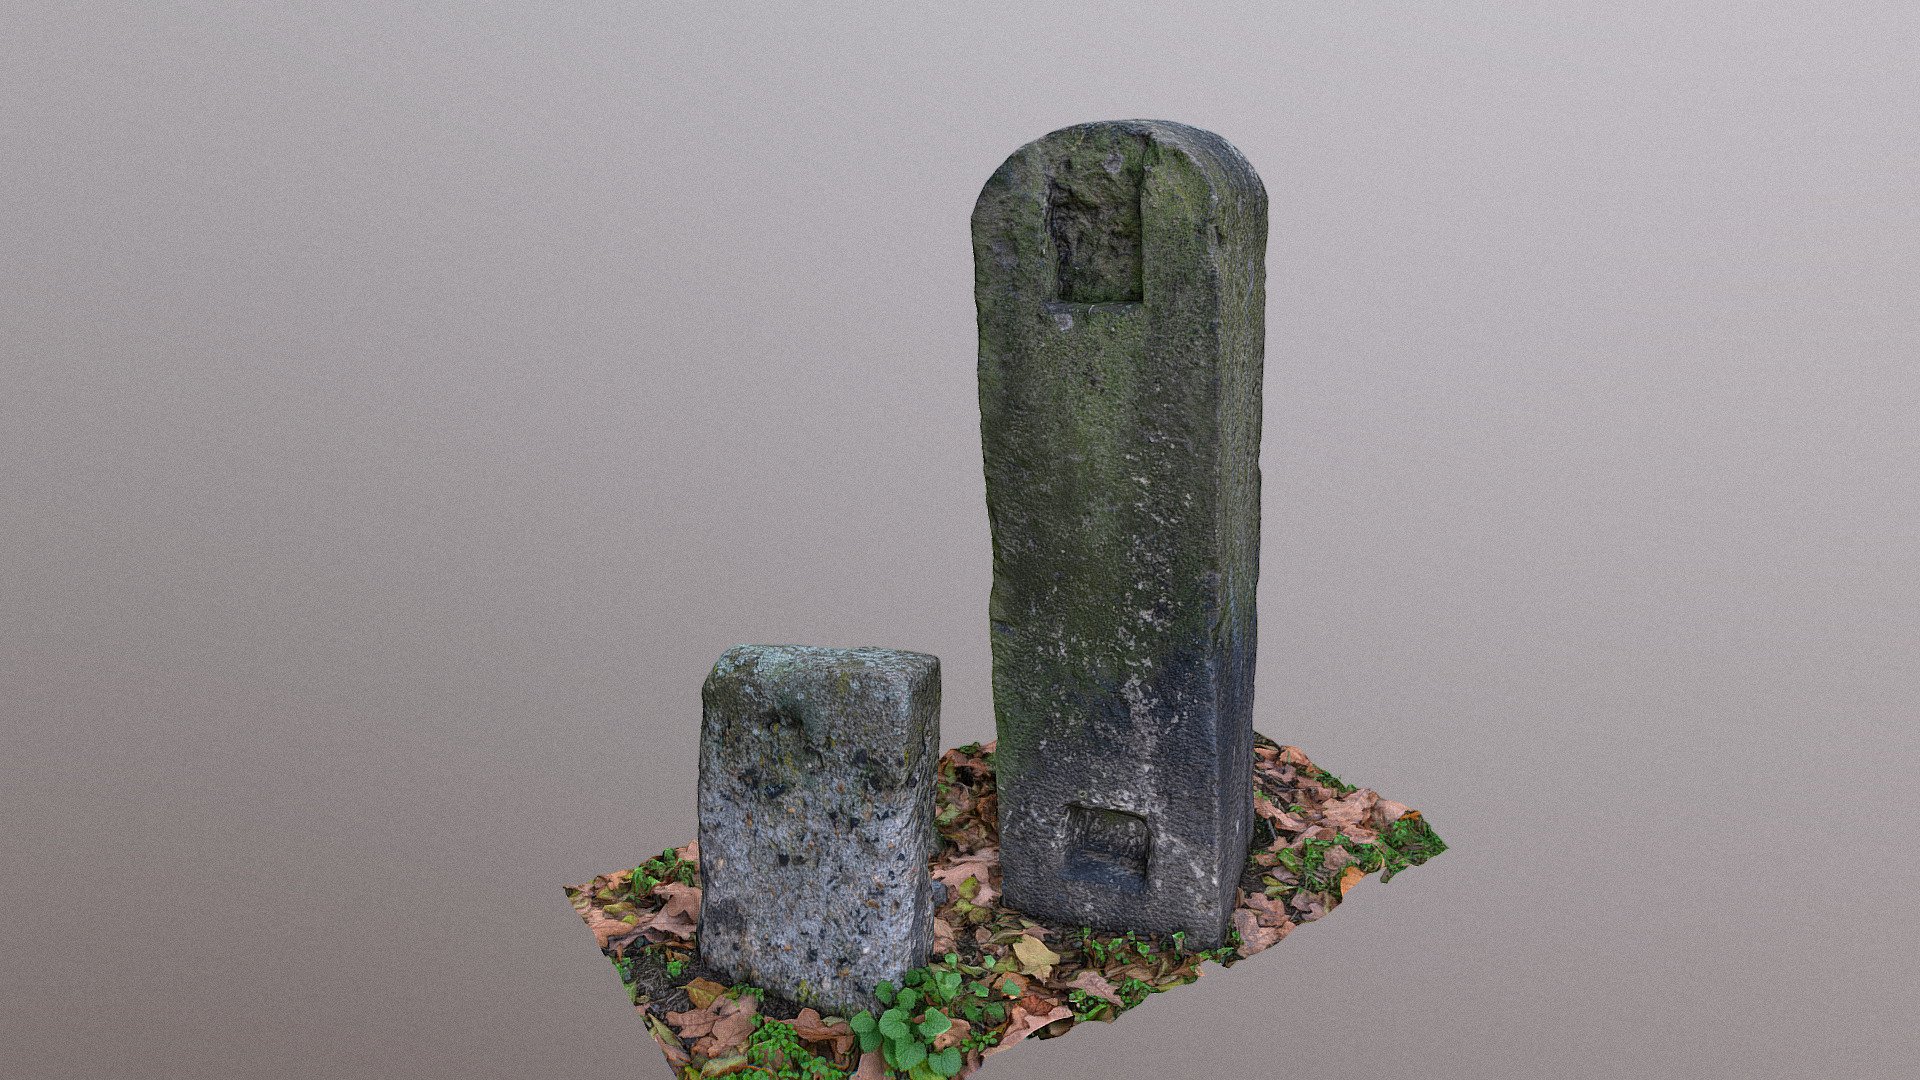 Boundary way road marker dark path stone sign

Photogrammetry scan 70x24MP, 4x8K texture

3D Model Free download - Boundary way road marker stone - Download Free 3D model by matousekfoto 3d model